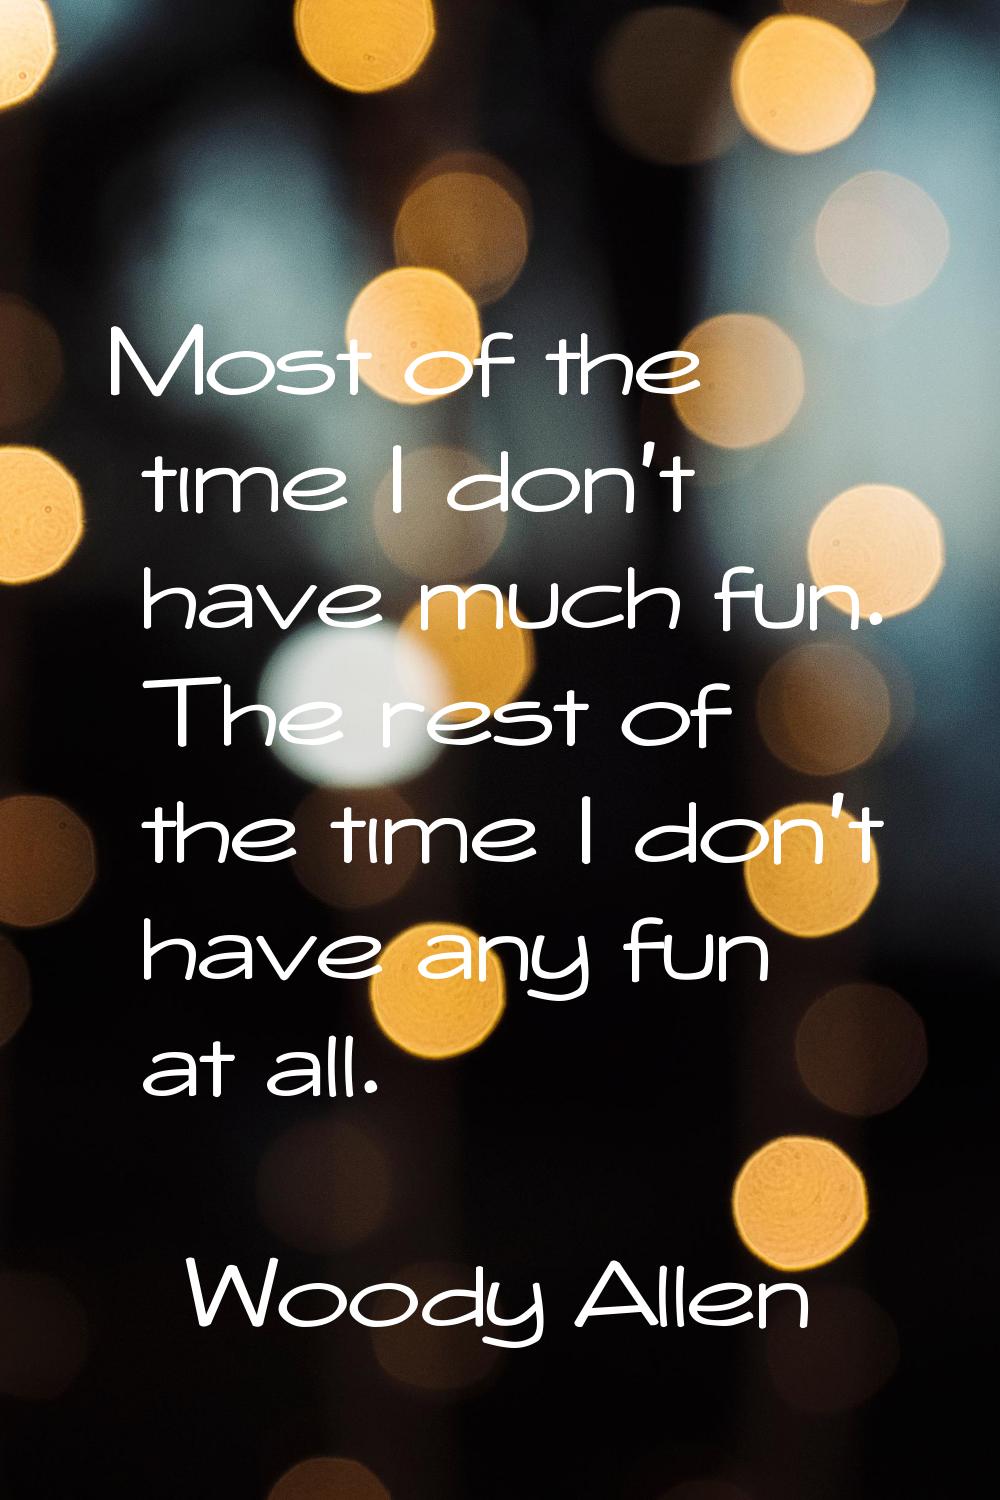 Most of the time I don't have much fun. The rest of the time I don't have any fun at all.